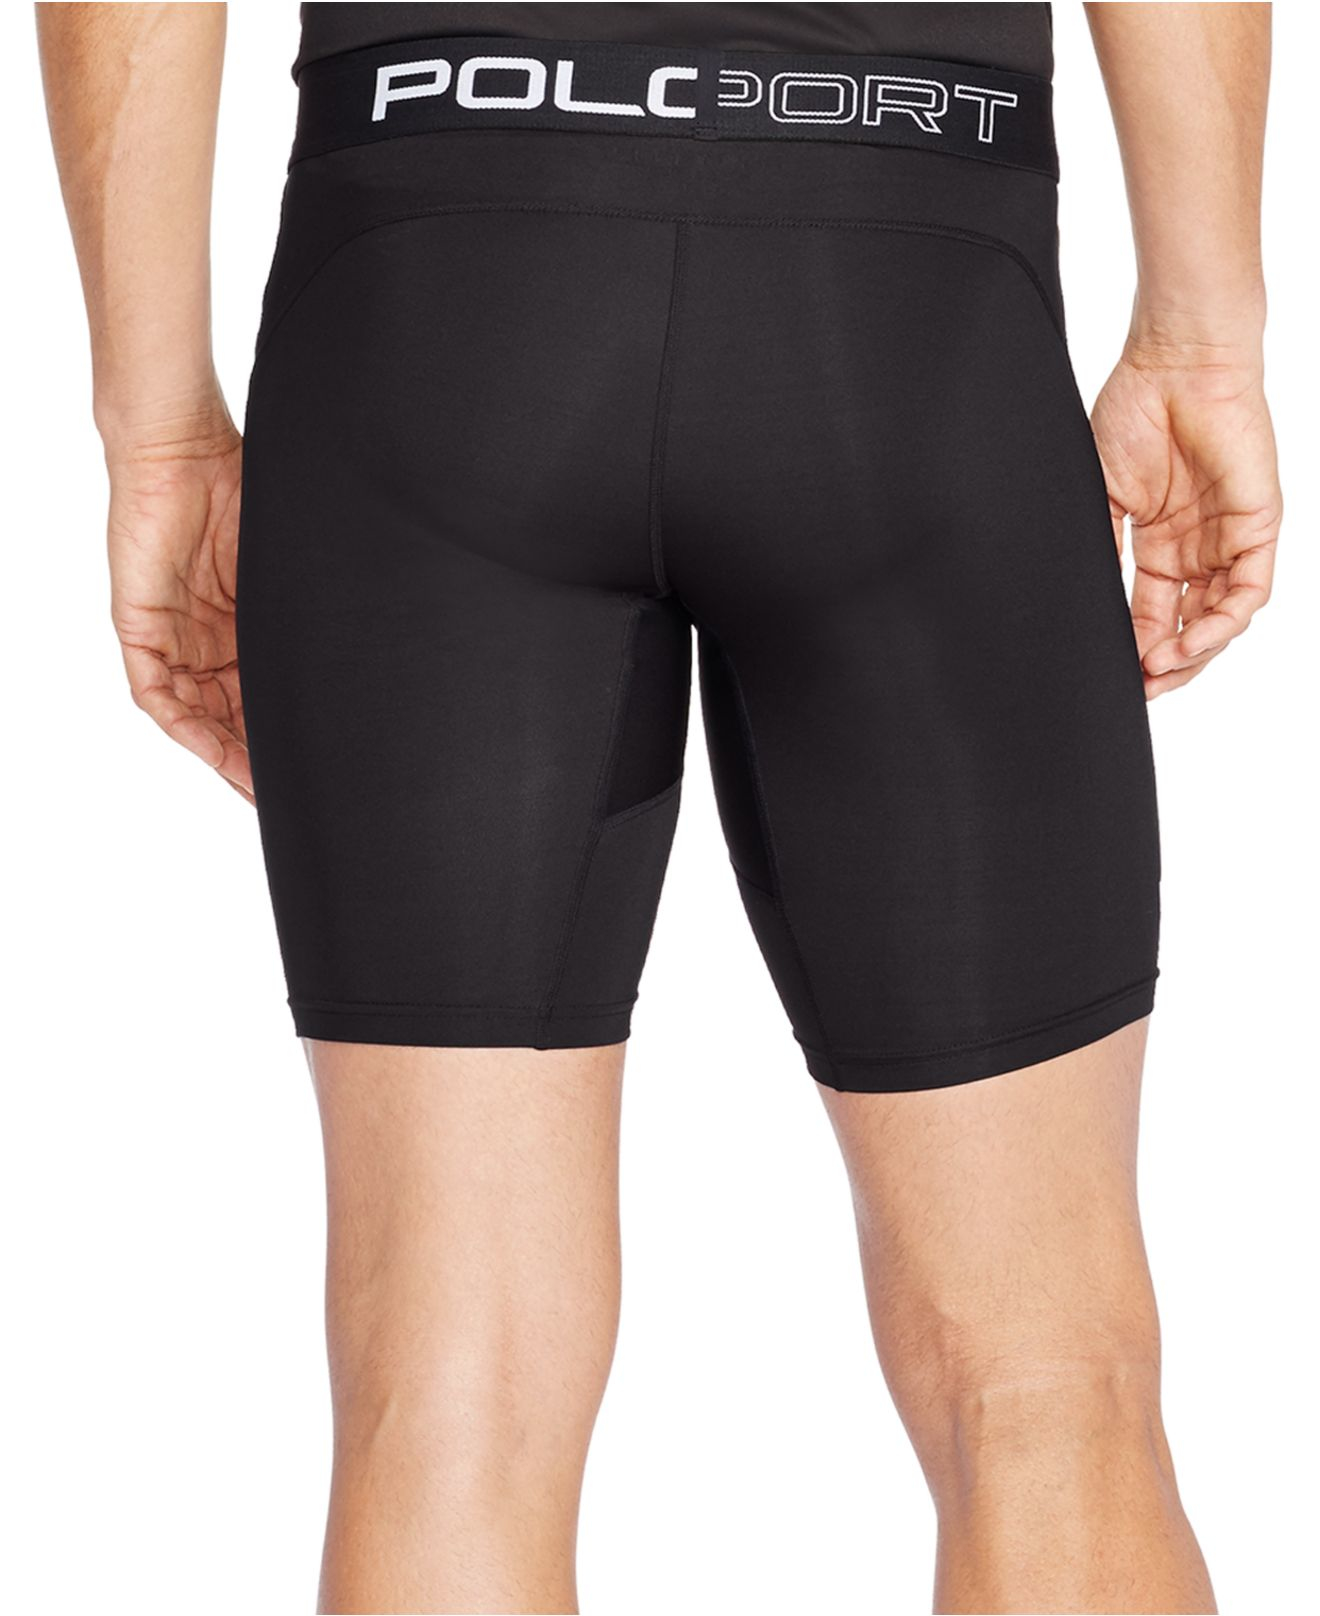 Polo Ralph Lauren All-sport Compression Shorts in Black for Men - Lyst